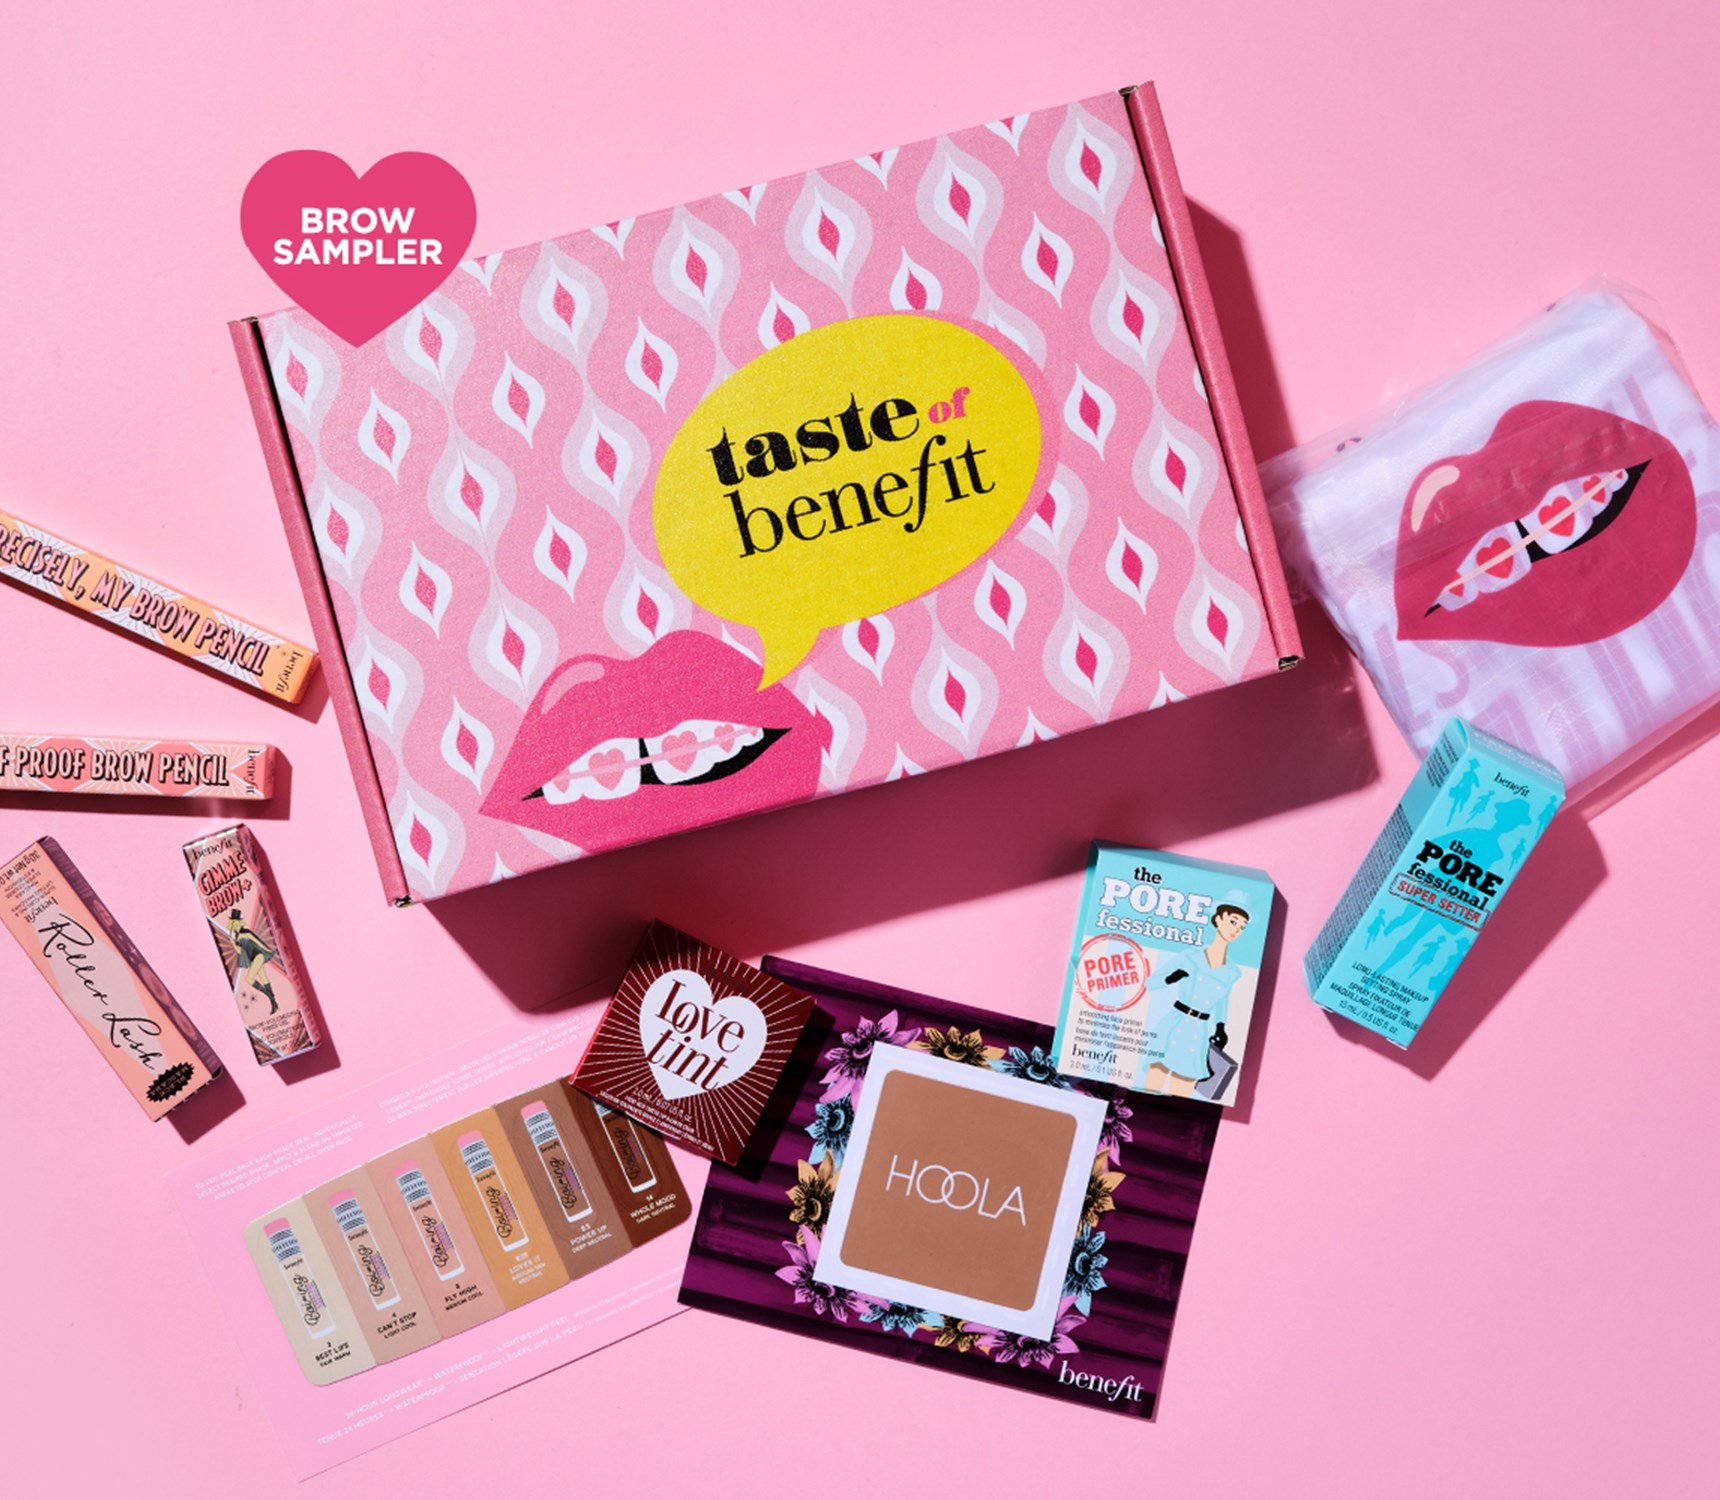 Benefit Cosmetics Taste of Benefit Sample Boxes: Curated Beauty